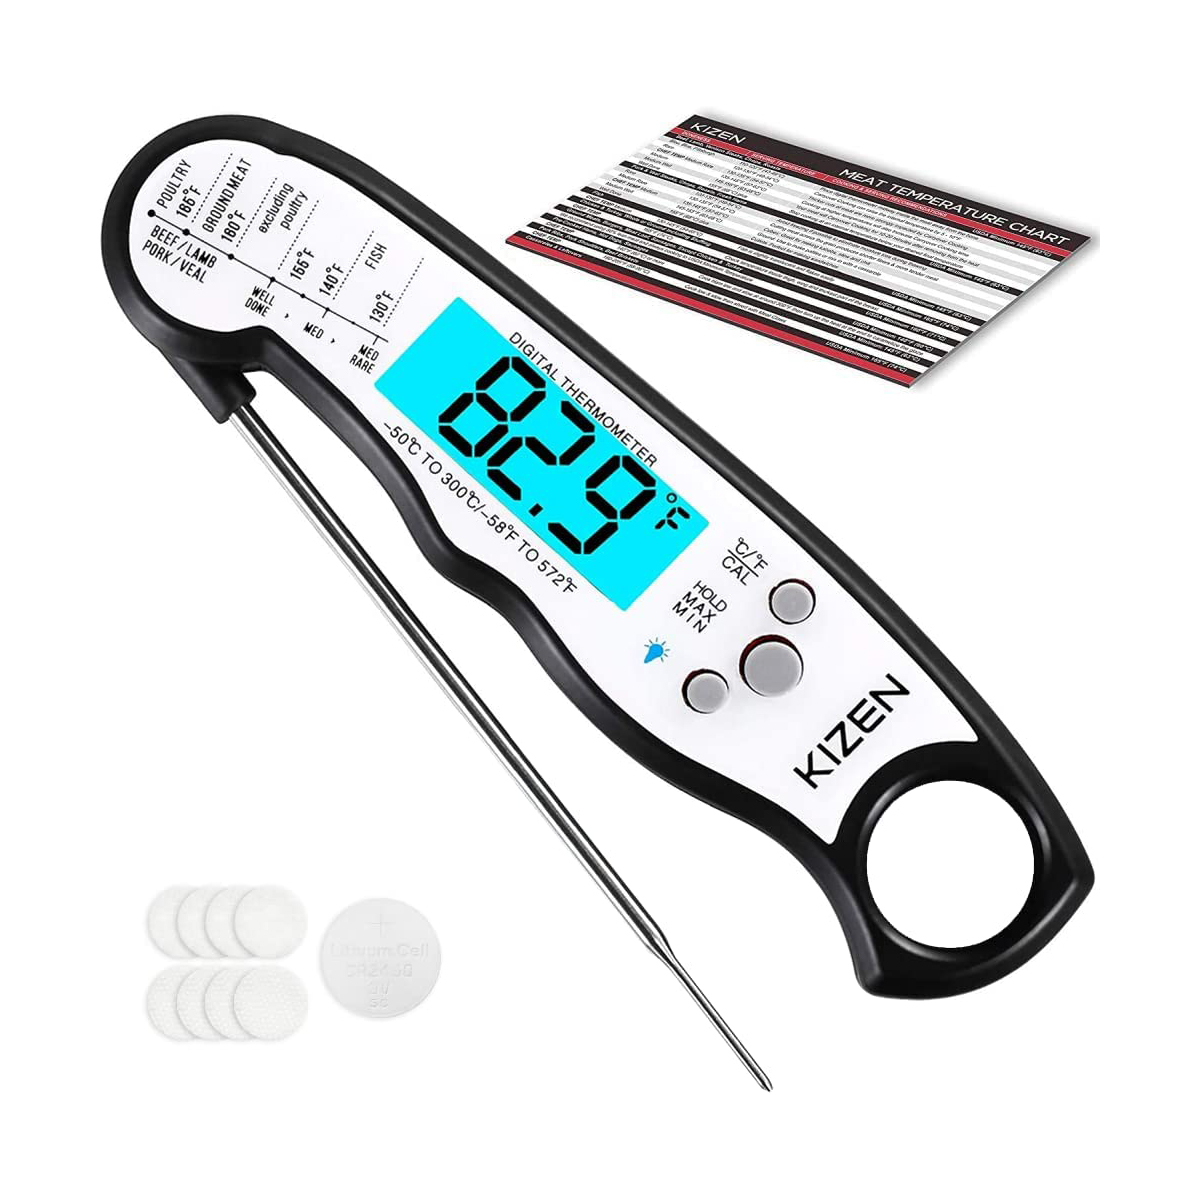 https://akns-images.eonline.com/eol_images/Entire_Site/2022928/rs_1200x1200-221028090416-1200-meat-thermometer.jpg?fit=around%7C1080:540&output-quality=90&crop=1080:540;center,top